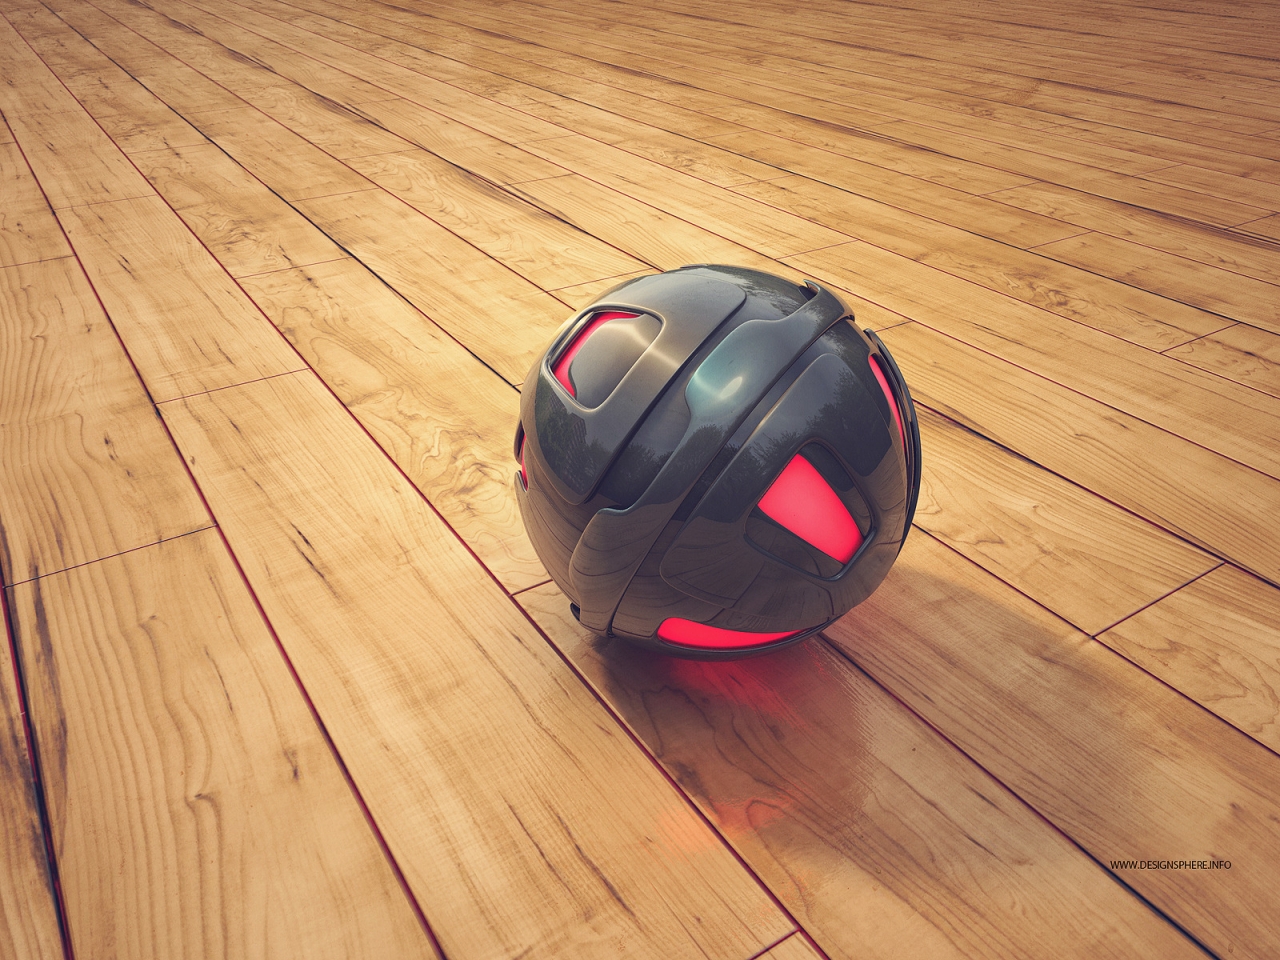 Sphere for 1280 x 960 resolution